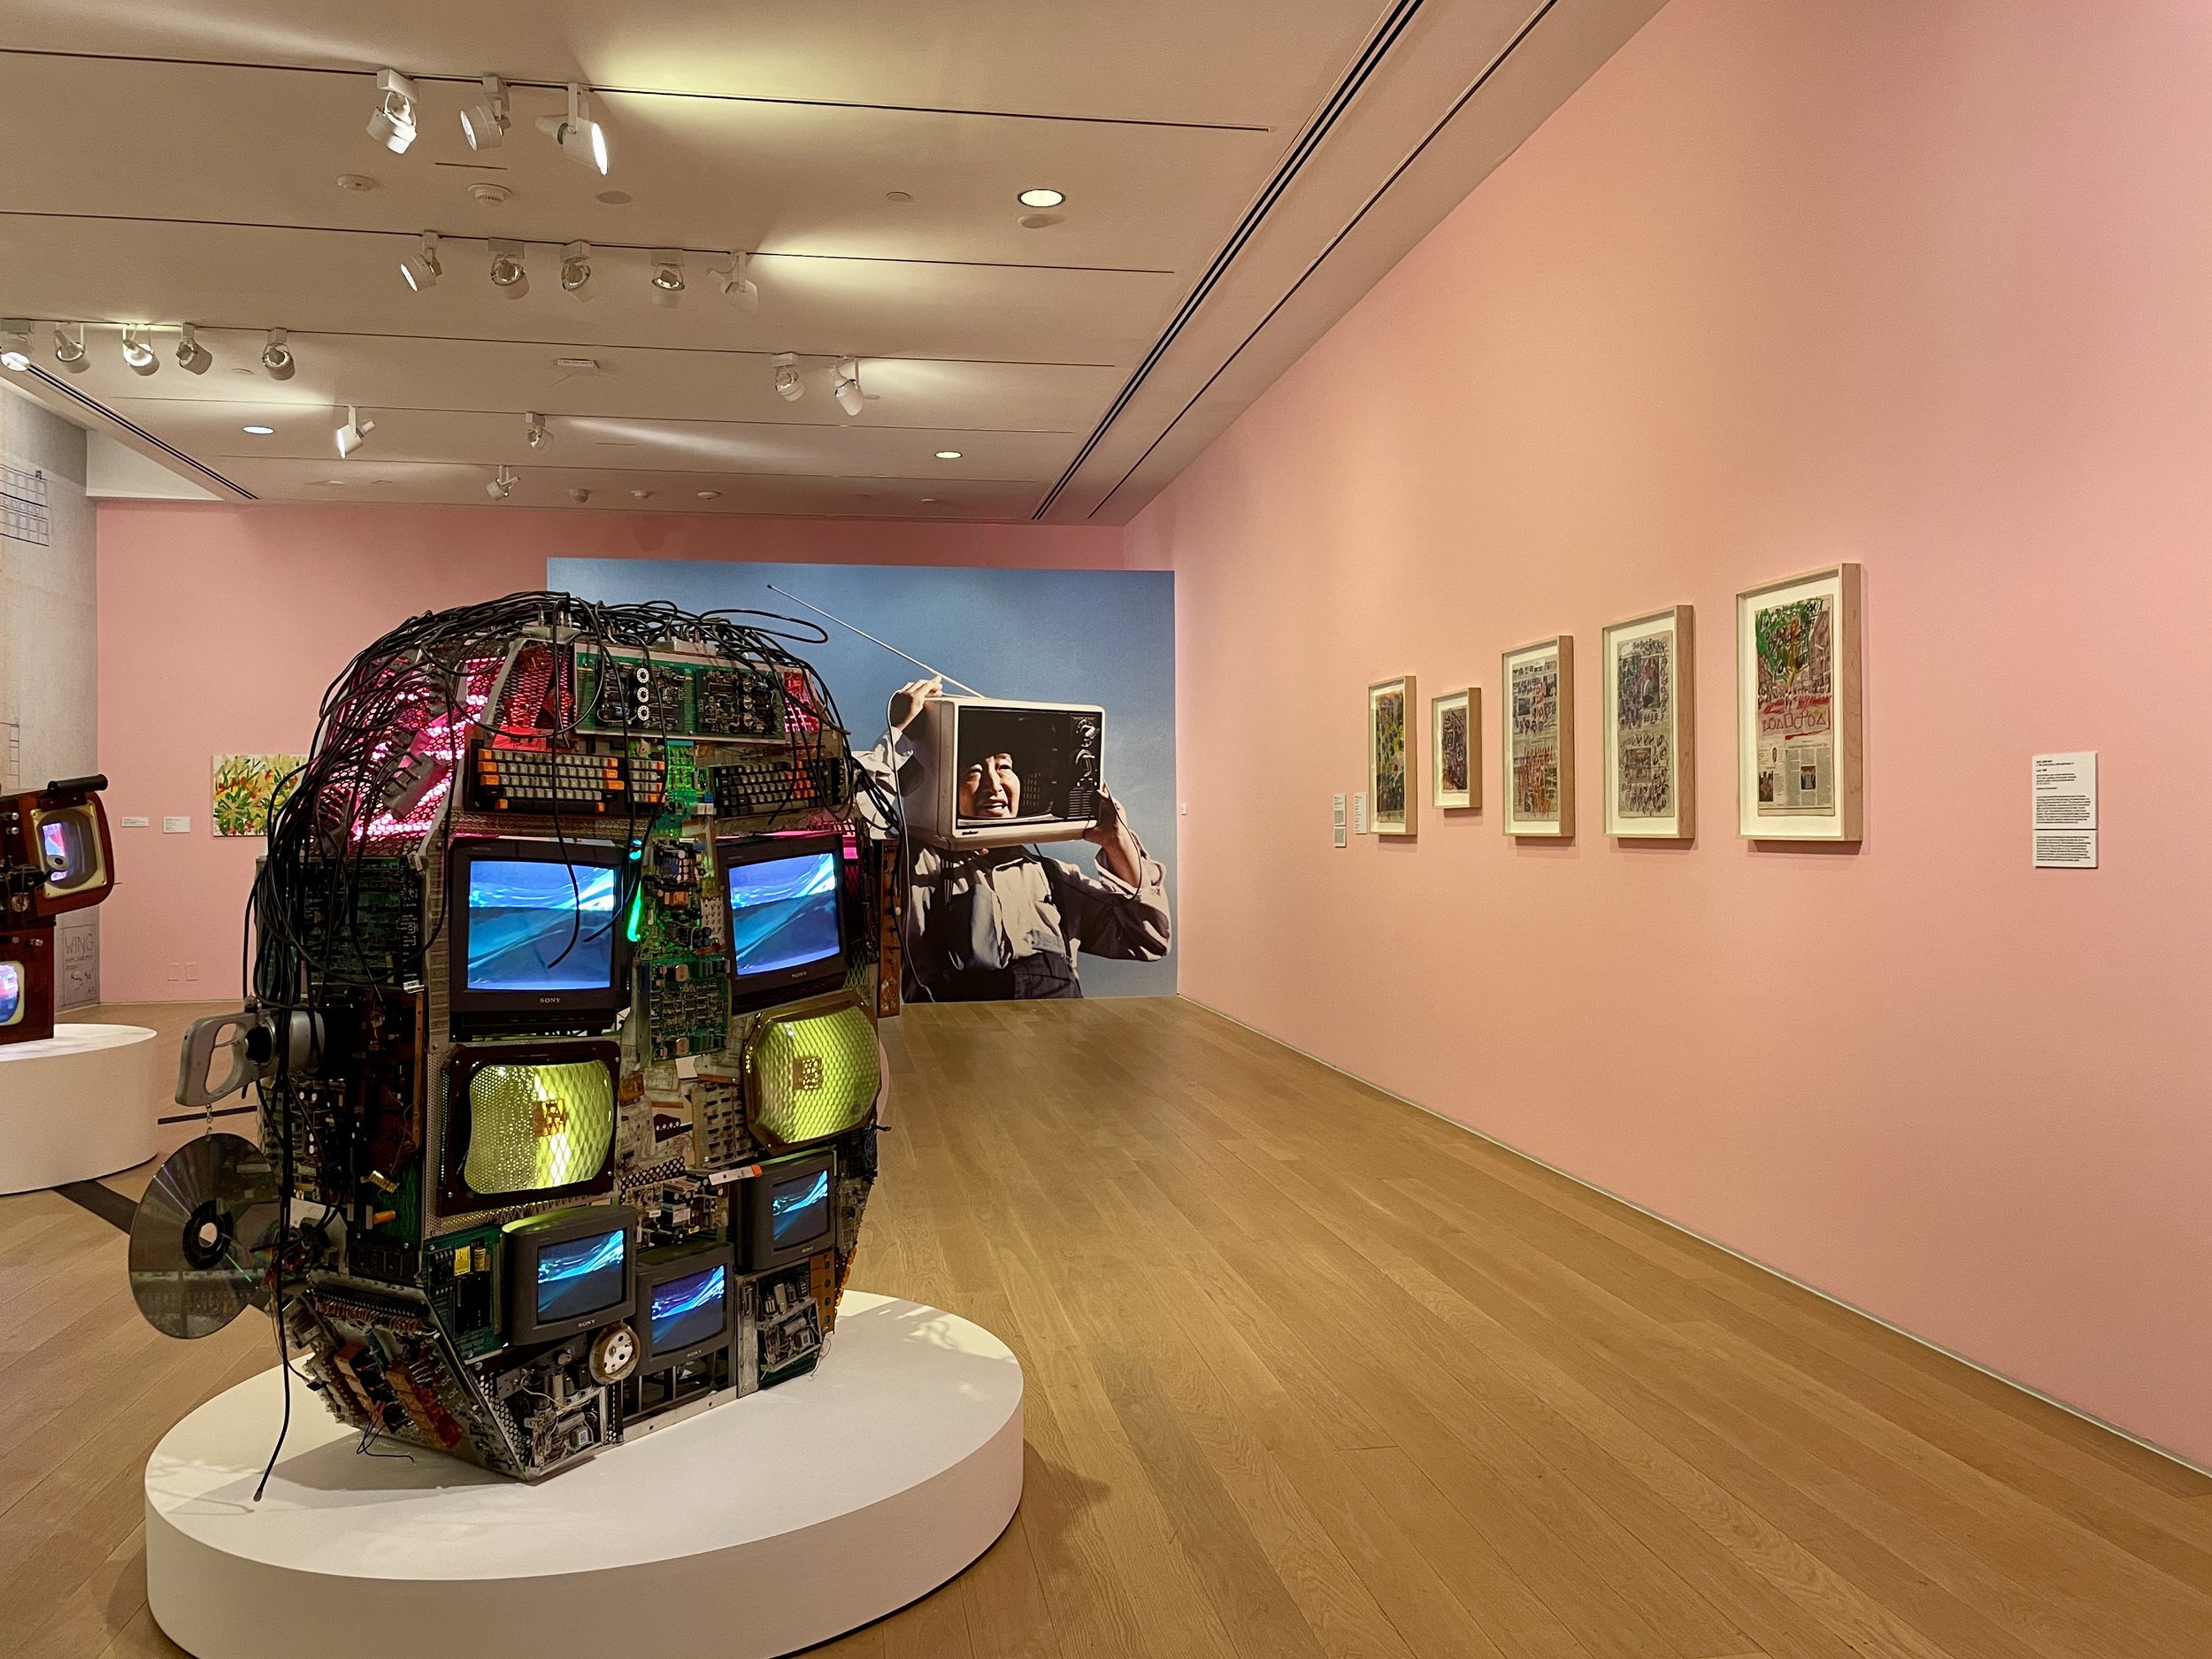  Nam June Paik,  Lucy , 1992, aluminum frame, neon, oil paint, electrical wires, five TV sets, LaserDiscs, circuit boards, keyboards, typewriter, plastic, metal and electrical elements 63 × 61 × 30 1/4 in. Collection of Cathy Vedovi, with Paik’s seri